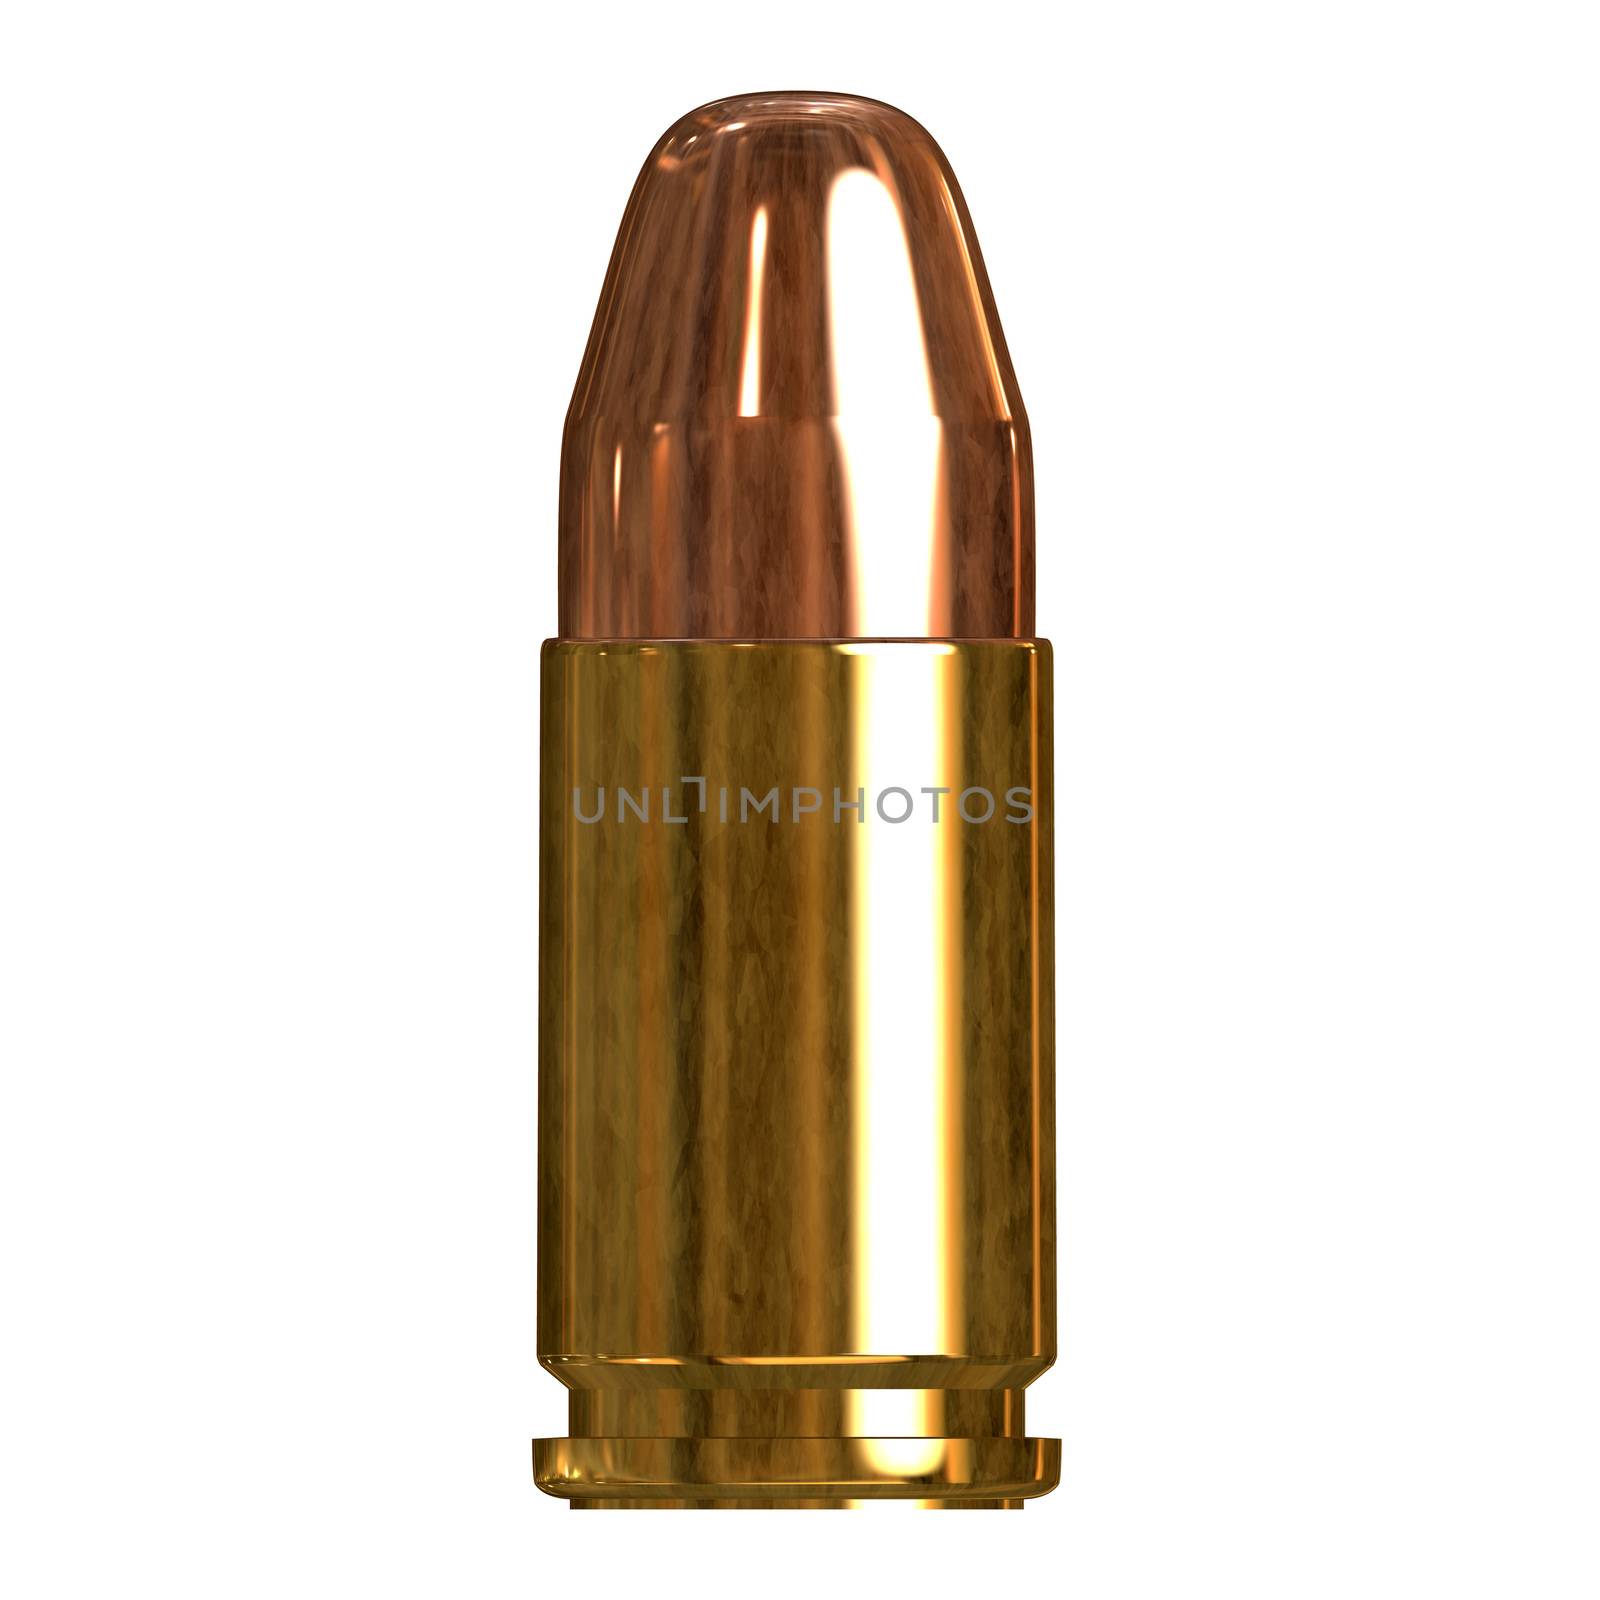 3D illustration of a single bullet isolated over a white background.